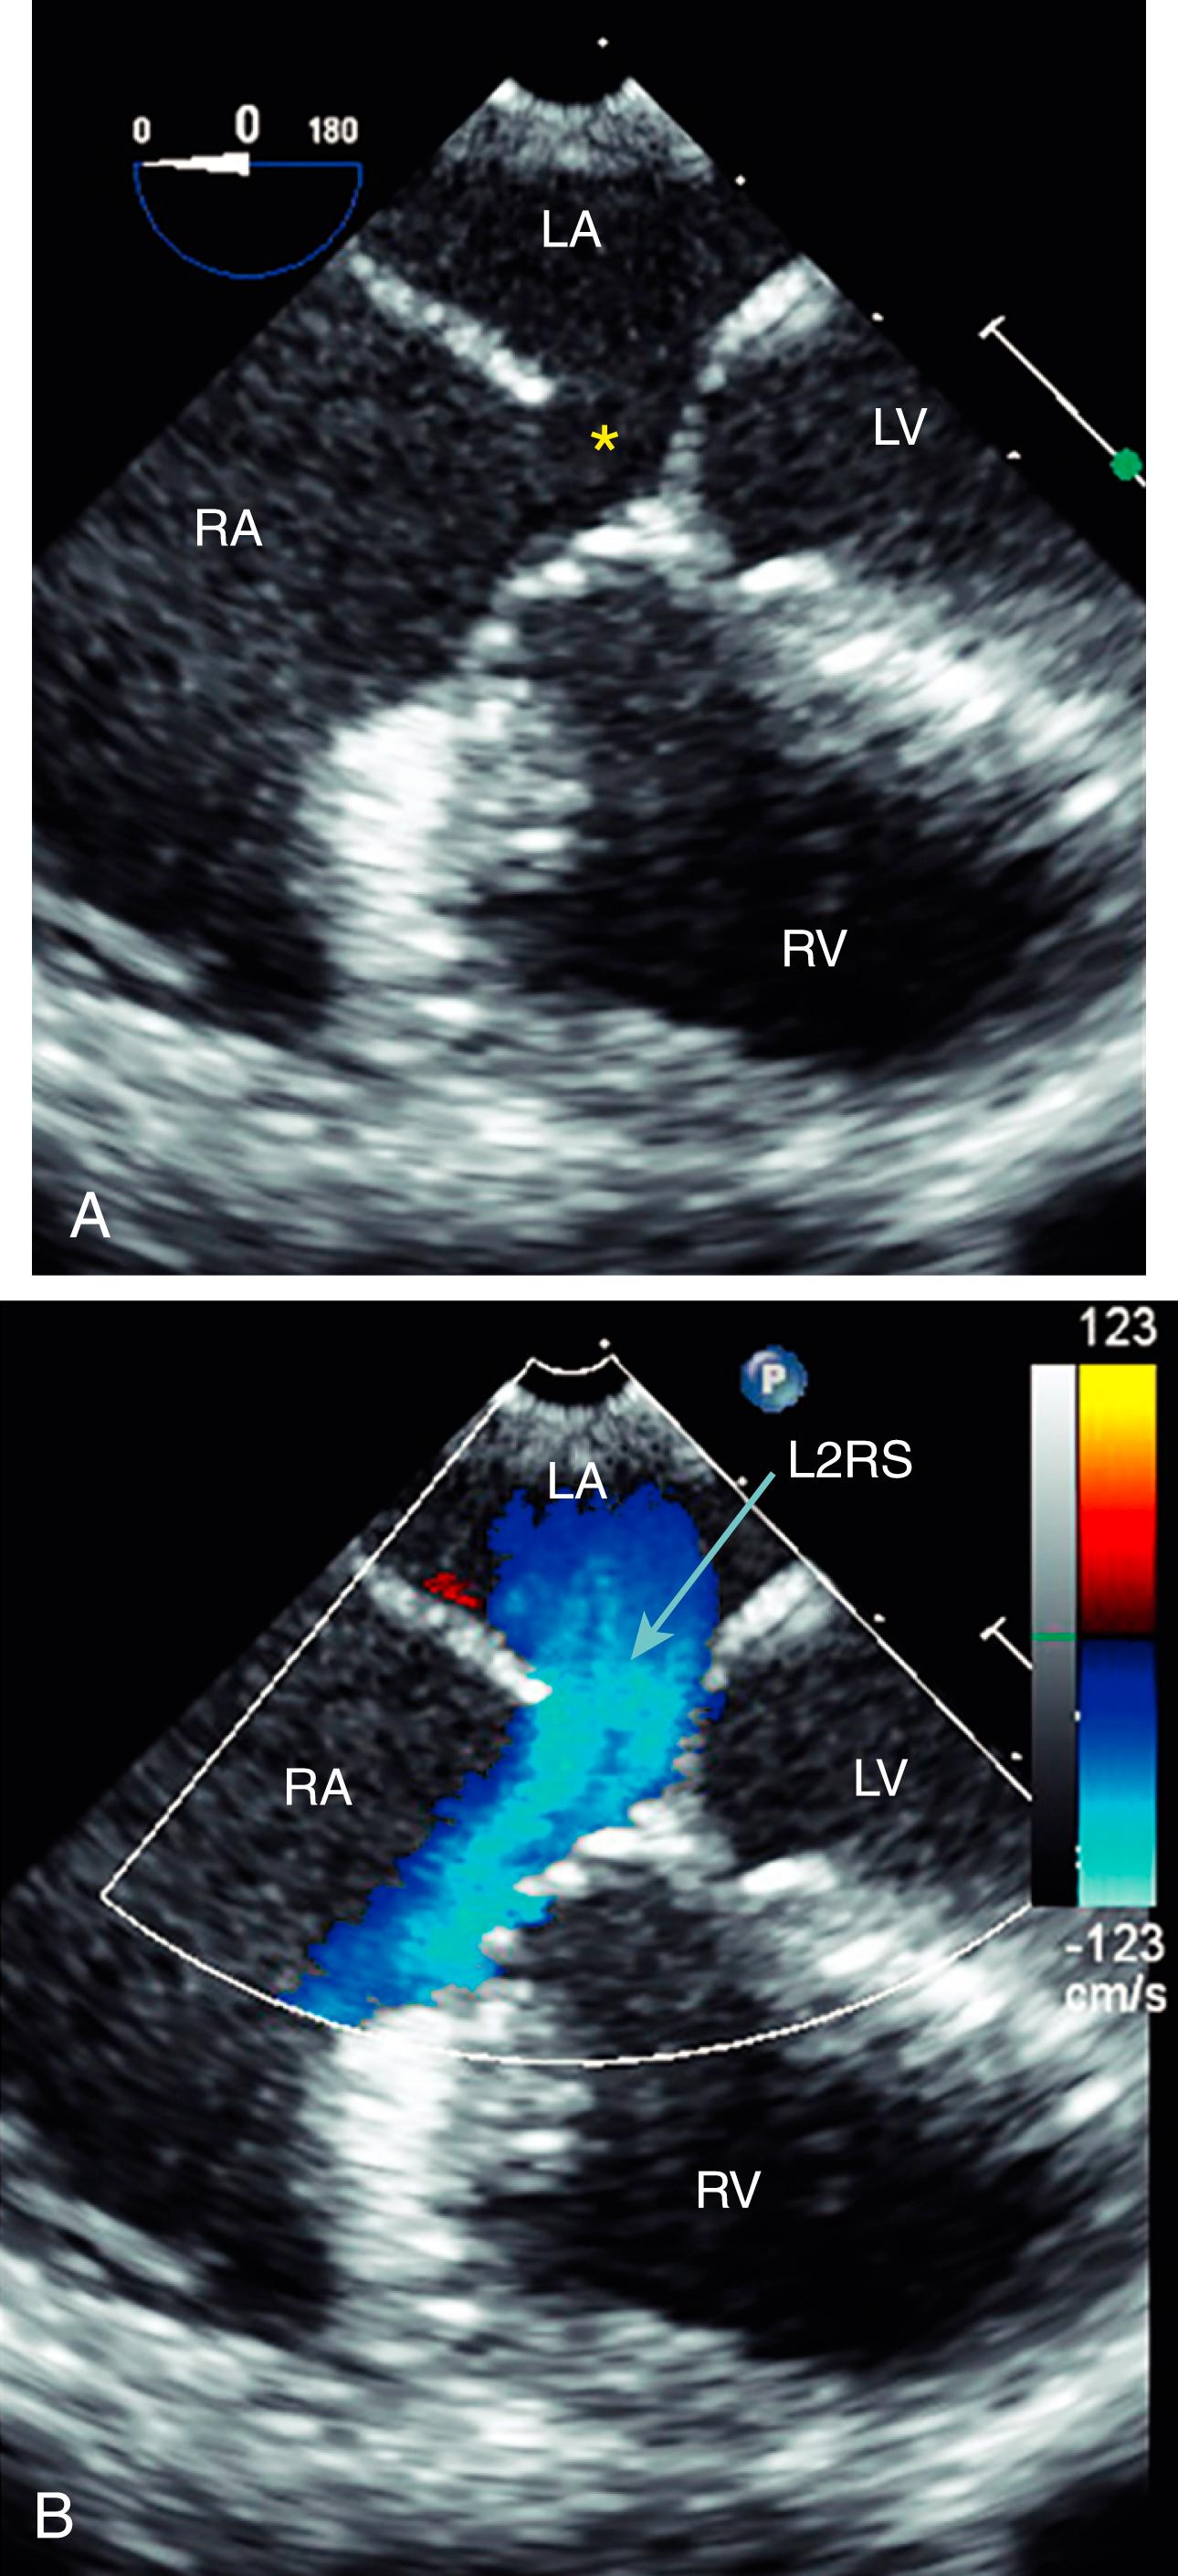 Figure 141.2, A, Primum atrial septal defect (asterisk) visualized in the midesophageal four-chamber view by transesophageal echocardiography. B, Color Doppler imaging shows the left-to-right shunt (L2RS). LA, Left atrium; LV , left ventricle; RA, right atrium; RV, right ventricle. (See accompanying Video 141.2 )